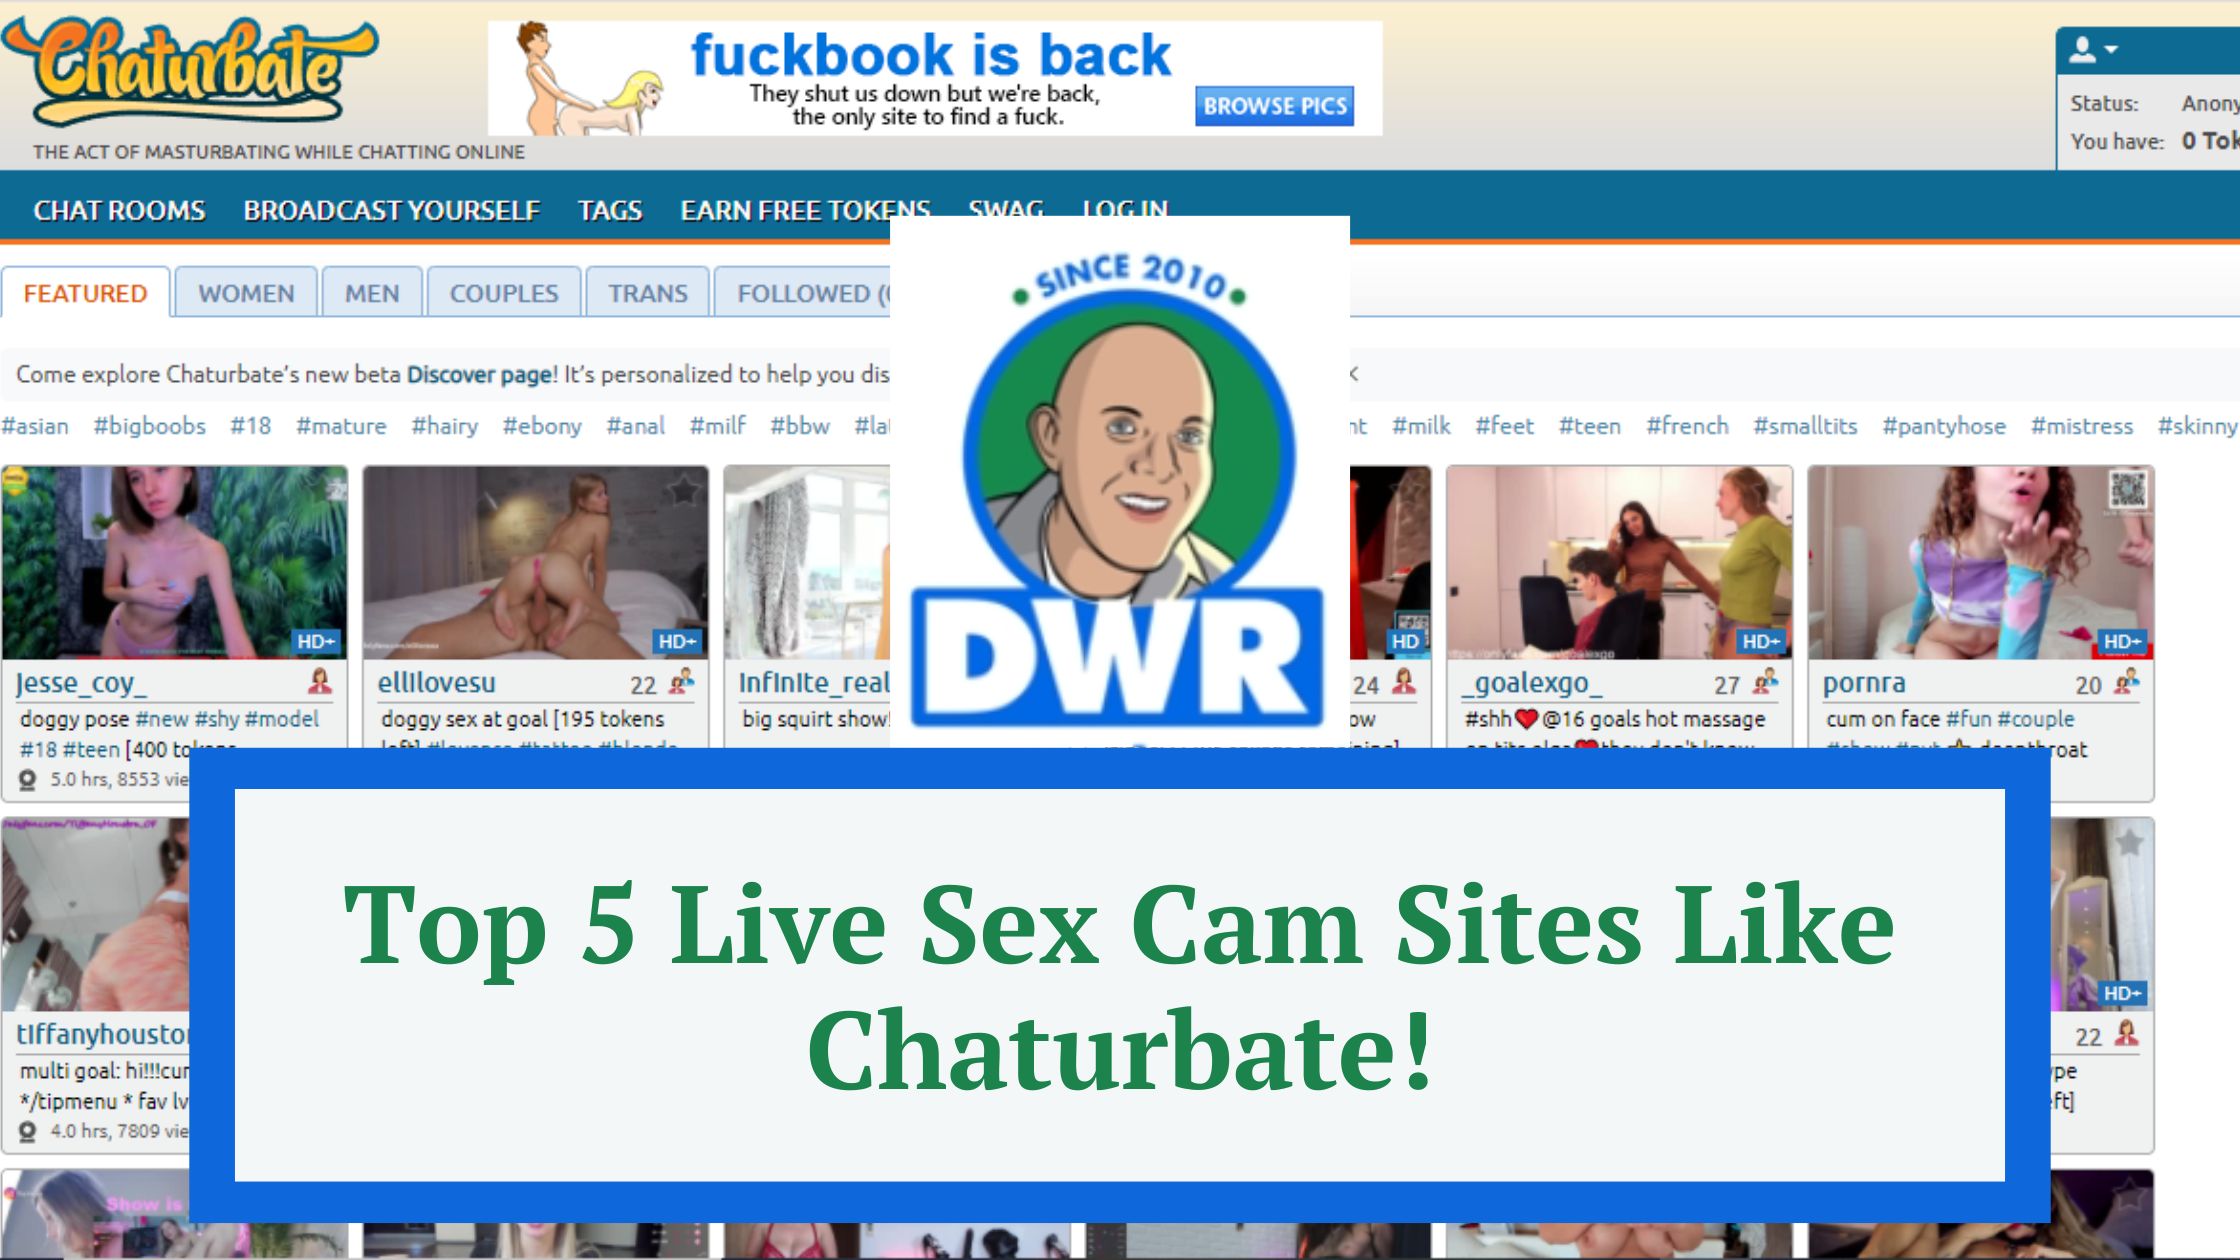 Top 5 Live Sex Cam Sites Like Chaturbate! image image